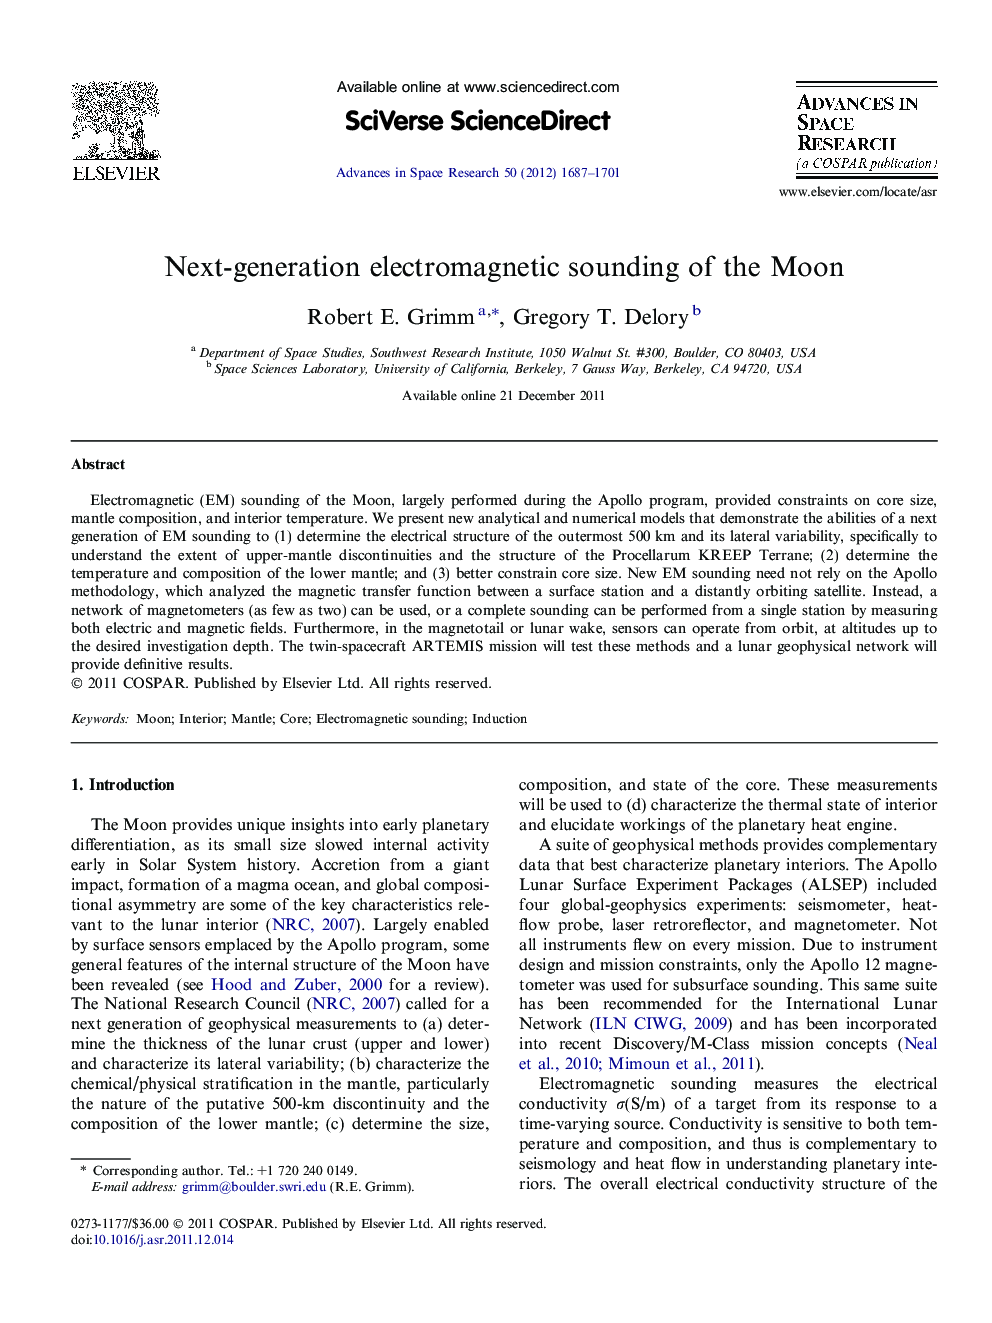 Next-generation electromagnetic sounding of the Moon